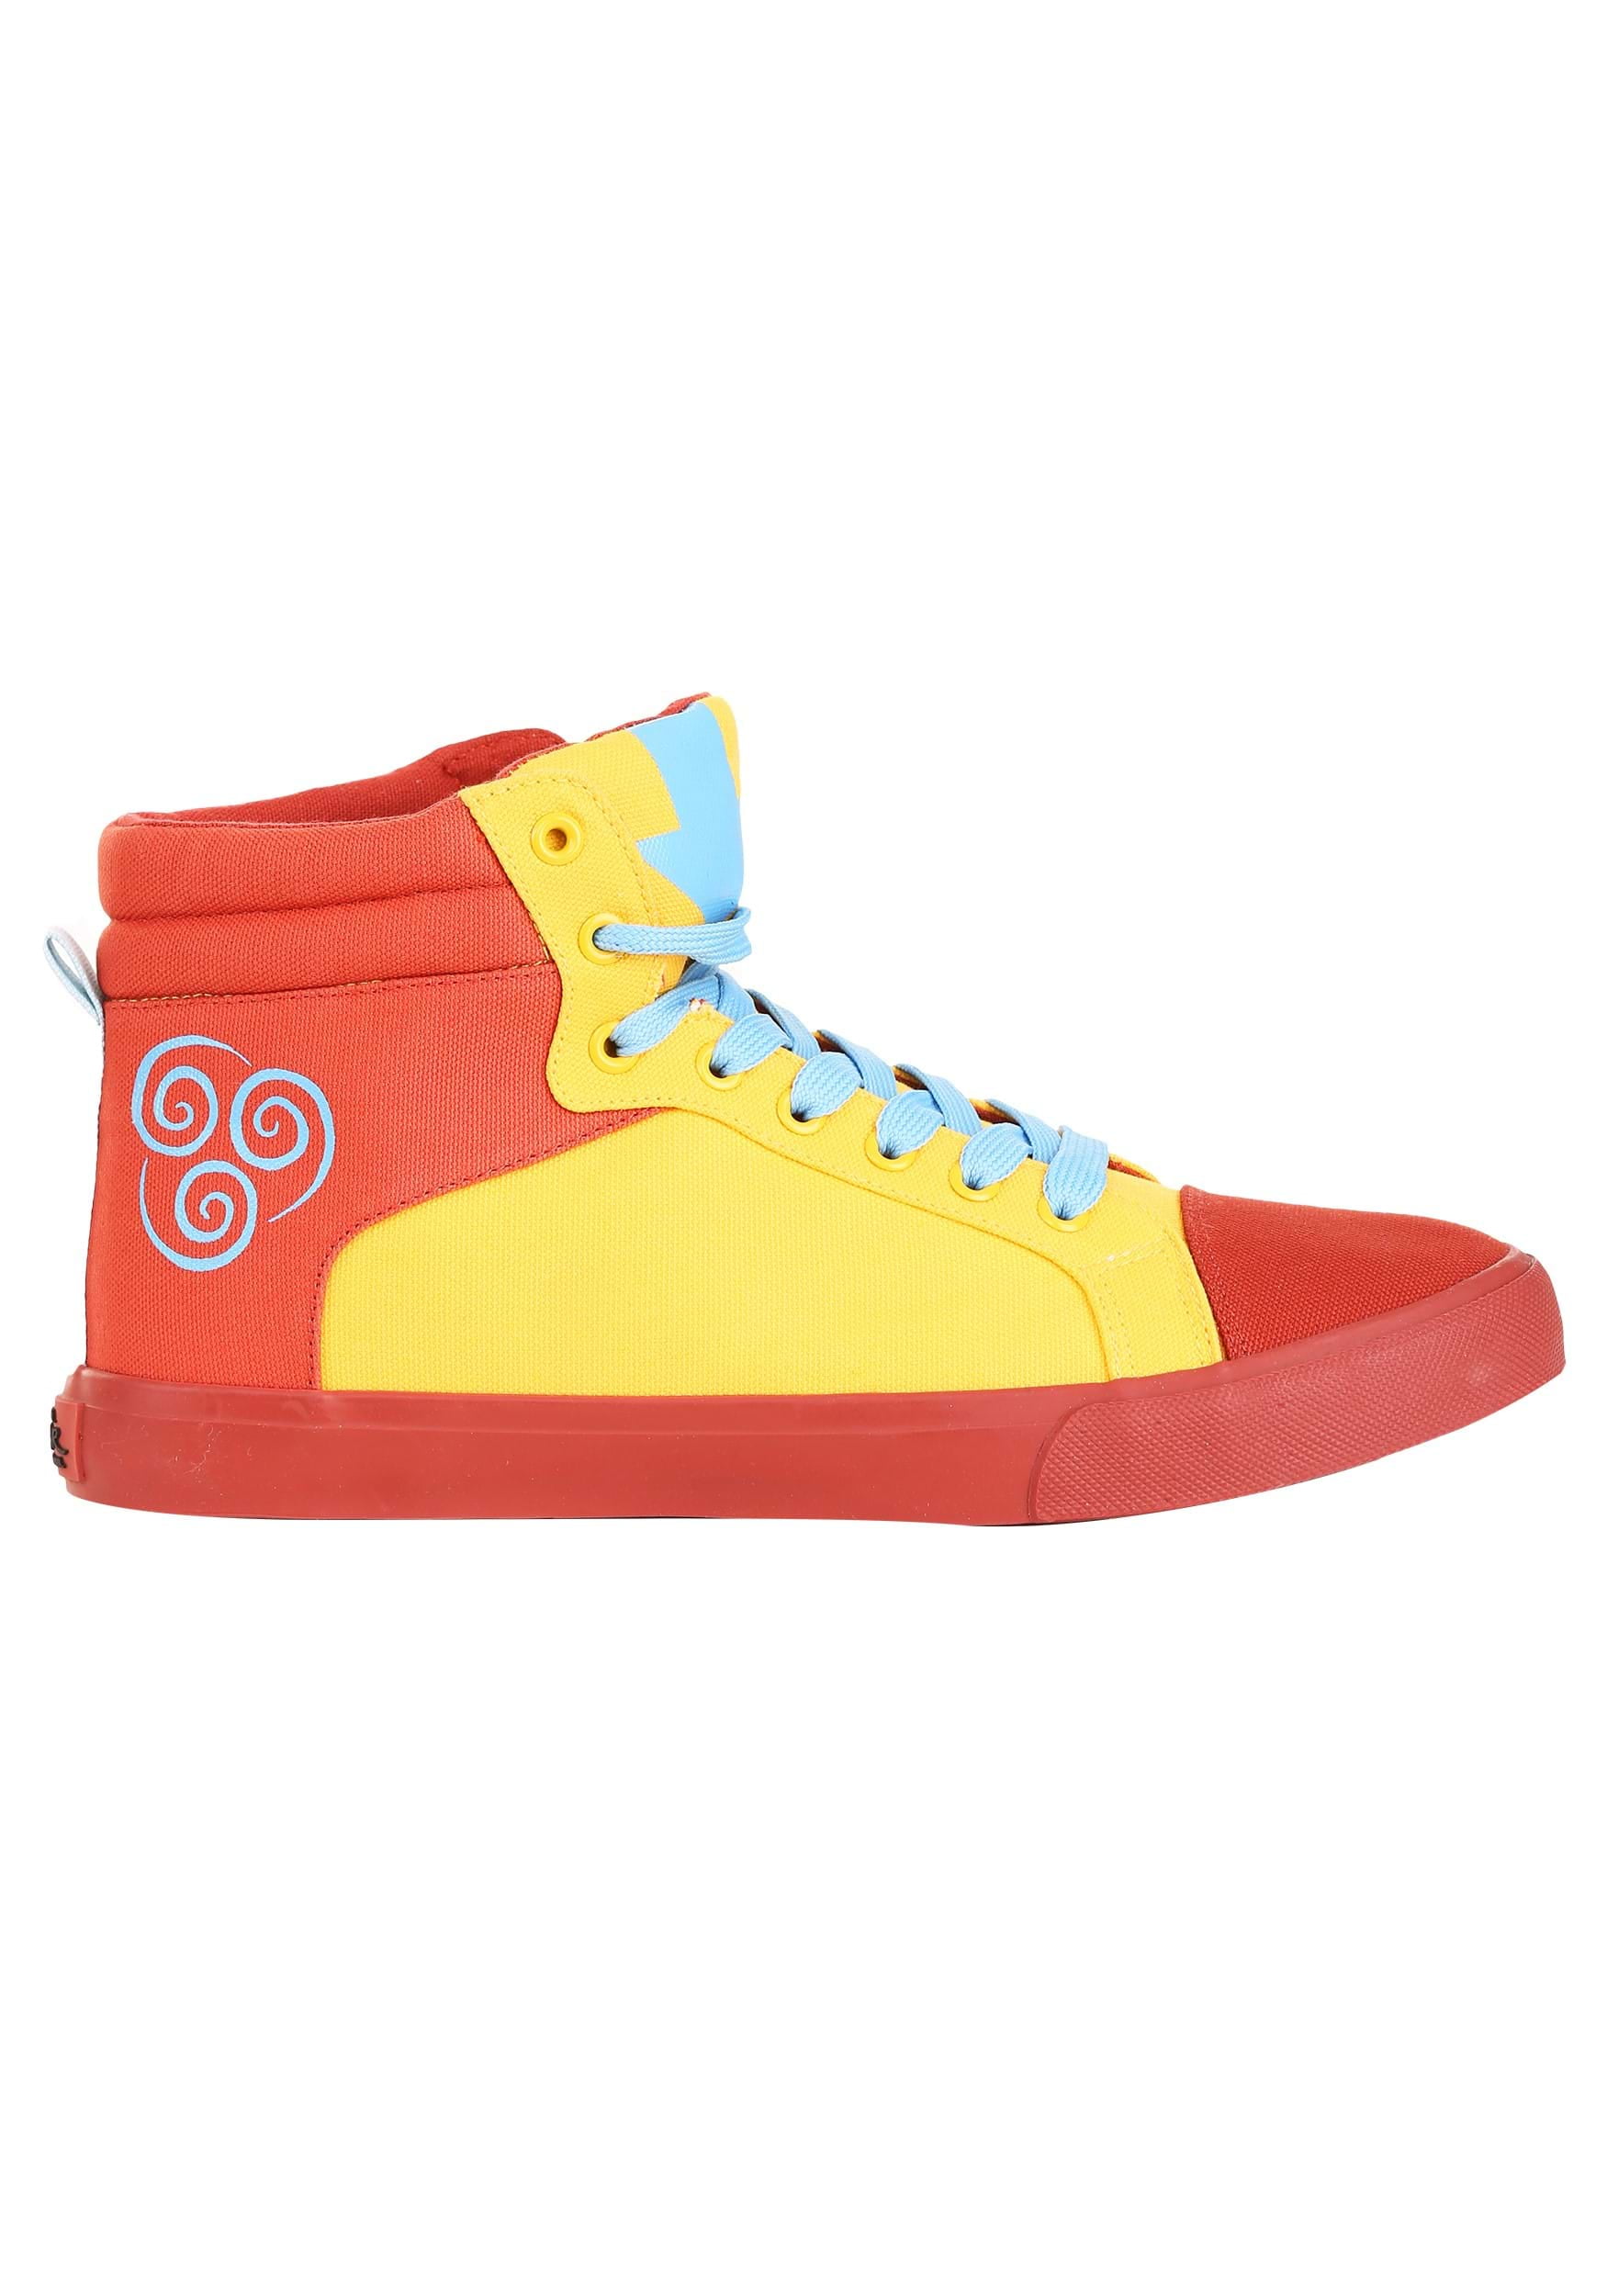 Avatar the Last Airbender Unisex Shoes 